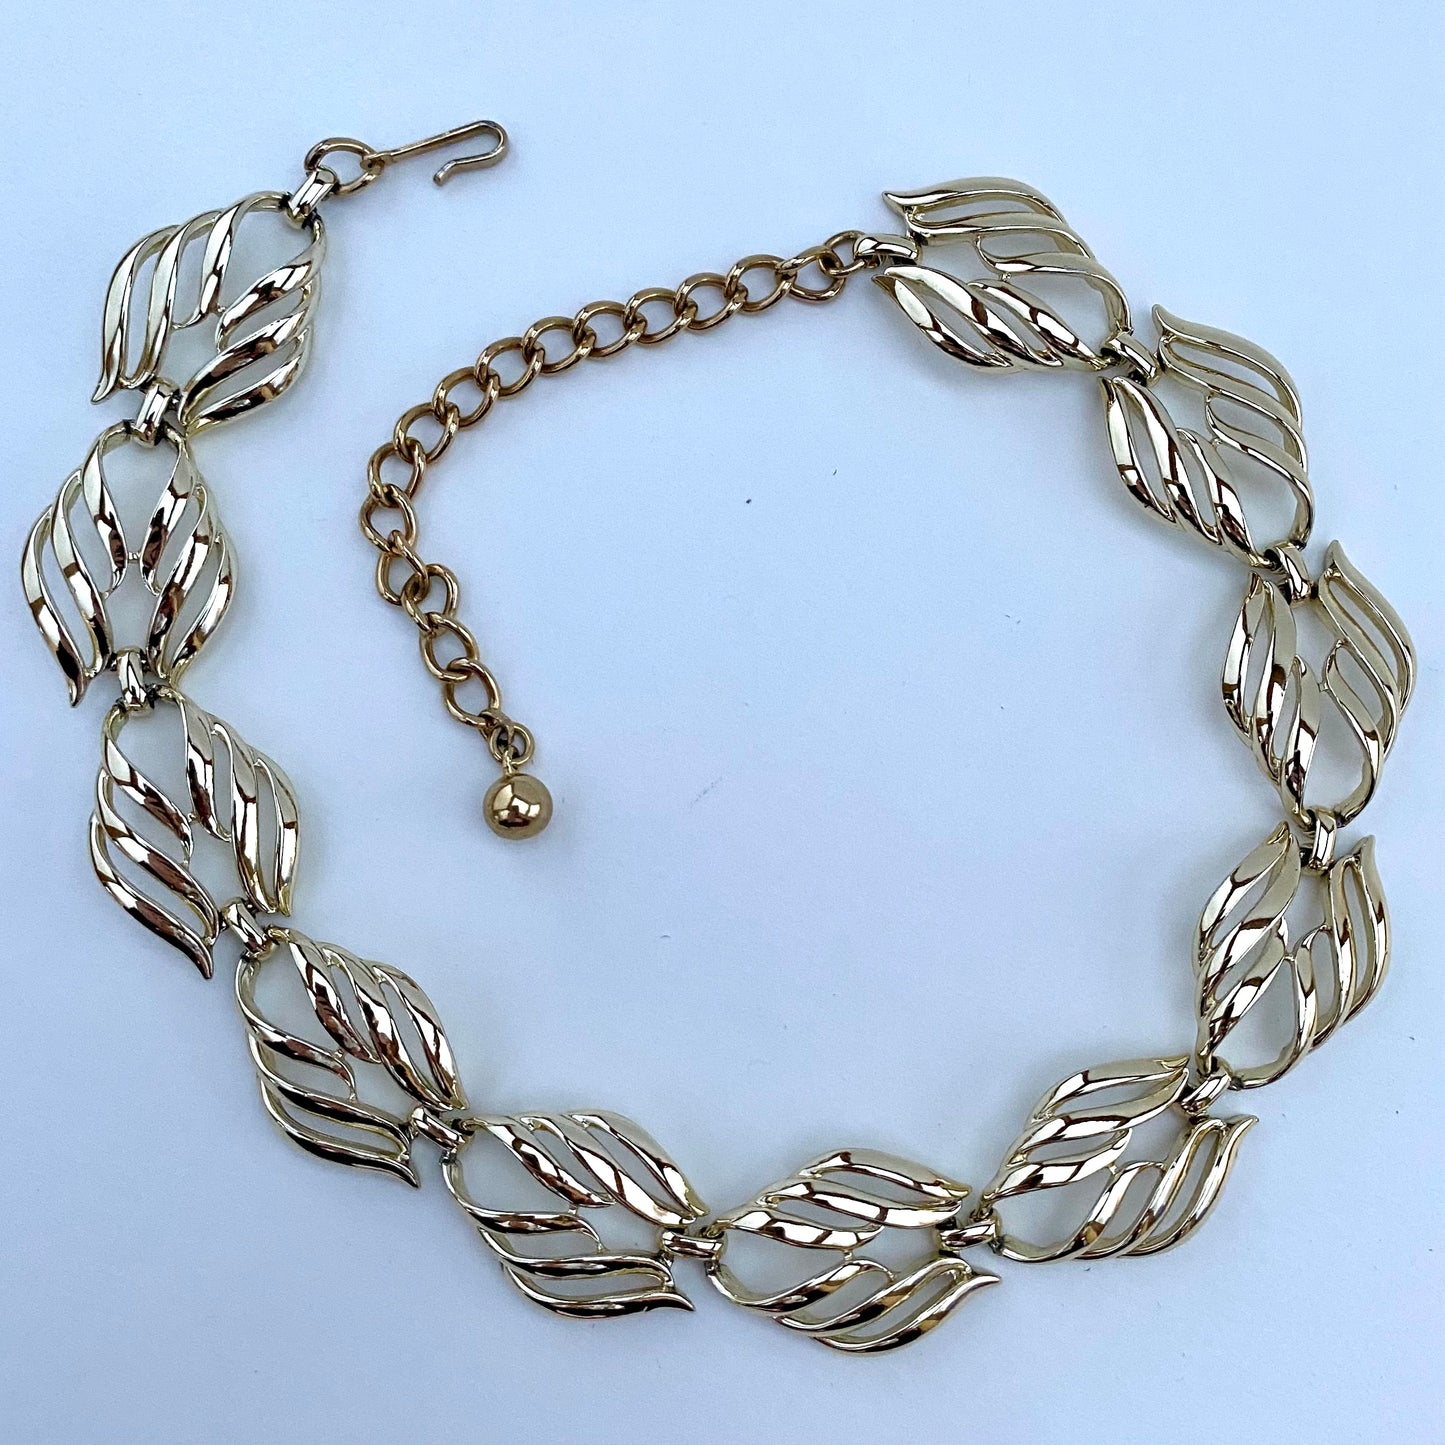 Late 50s/ Early 60s Coro Gold-Tone Necklace